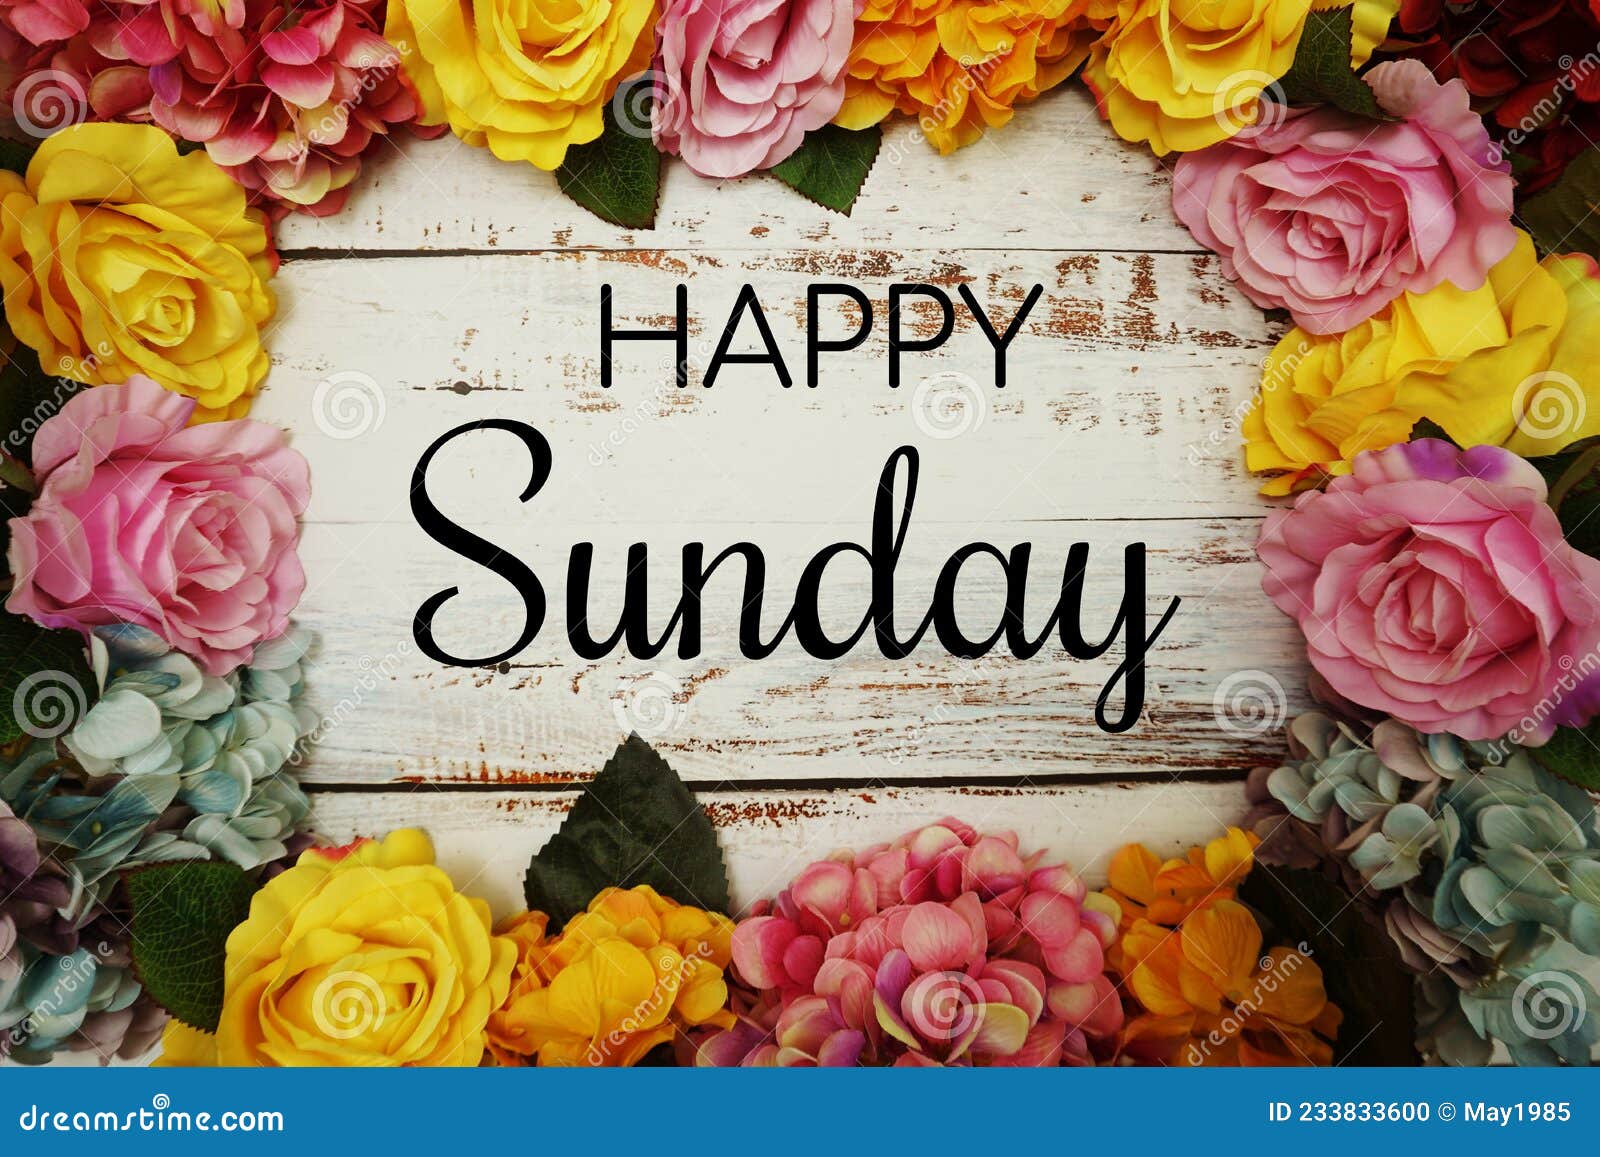 Happy Sunday Text and Flowers Colorful Border Frame on Wooden ...